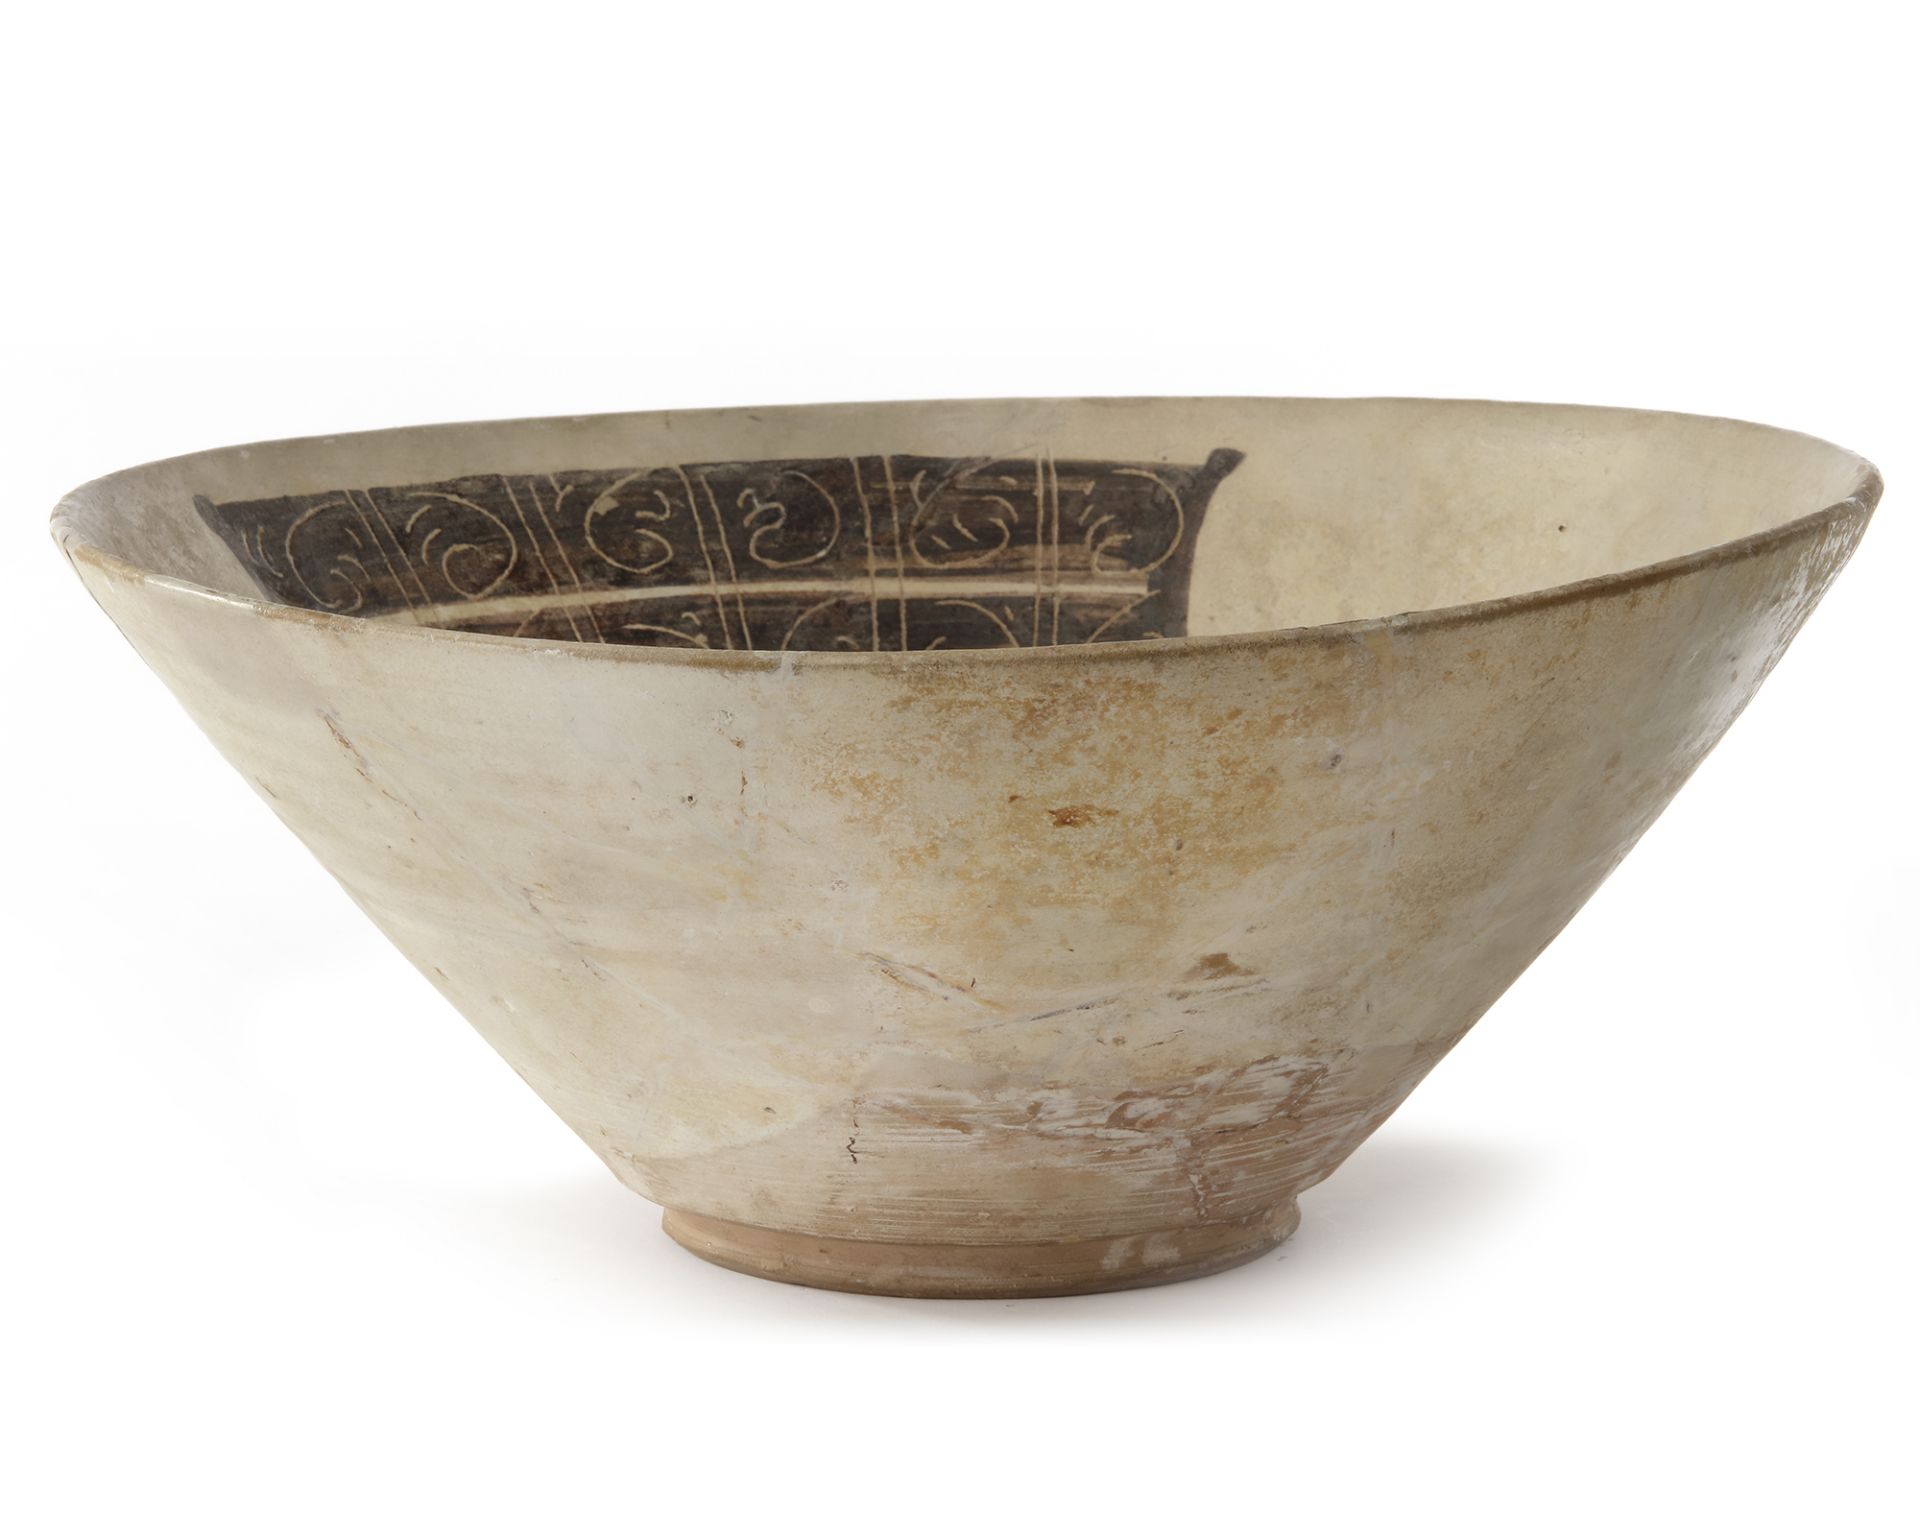 A LARGE POTTERY BOWL, SAMANID, CENTRAL ASIA OR NORTH EAST IRAN, 10TH CENTURY - Image 2 of 4